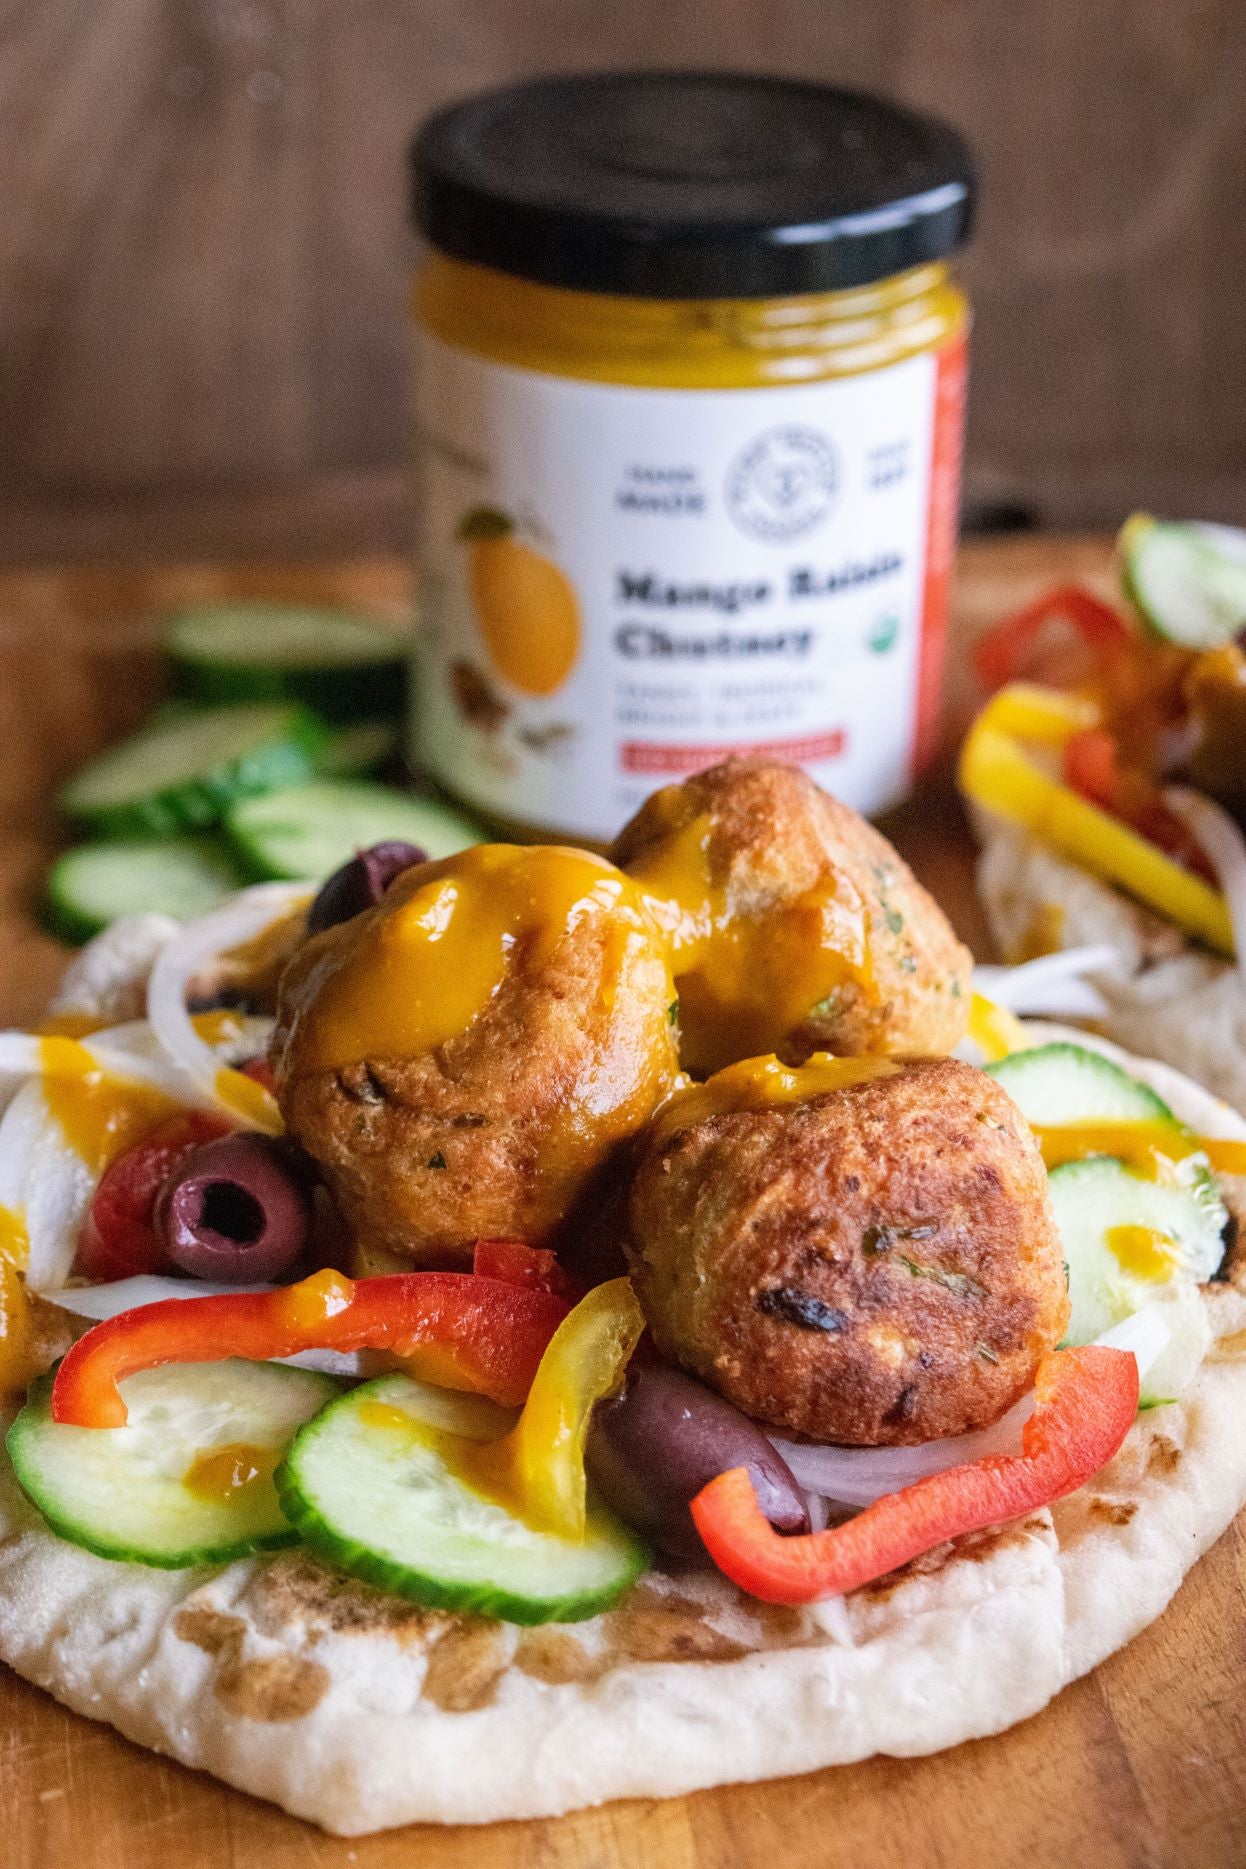 Gorgeous falafel and veg on pita with our tasty organic mango chutney in the background.